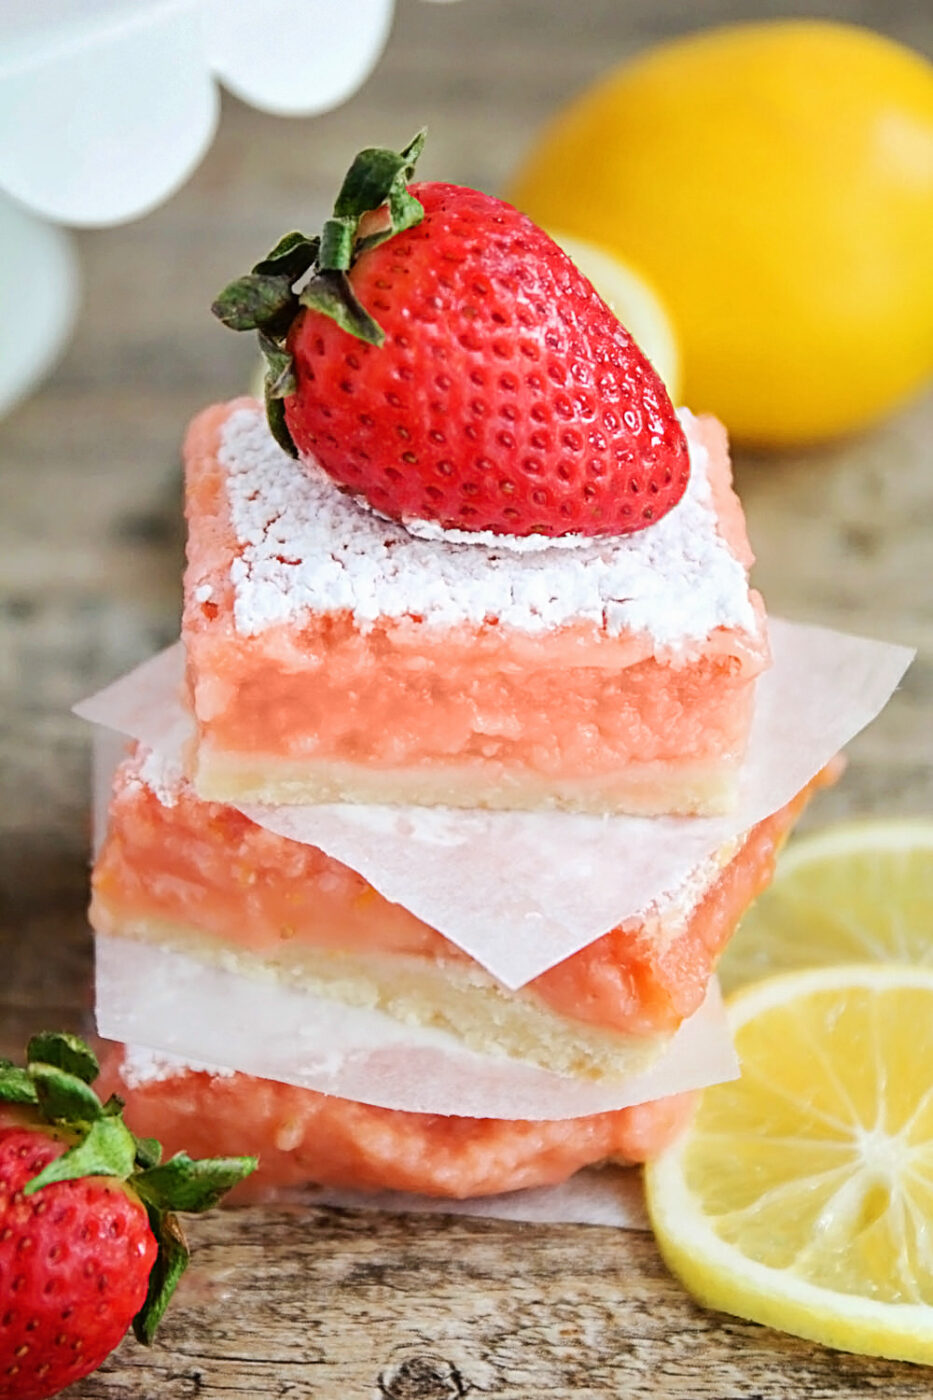 These strawberry lemonade bars are tangy and sweet and perfect for summer. They taste just like a glass of strawberry lemonade!